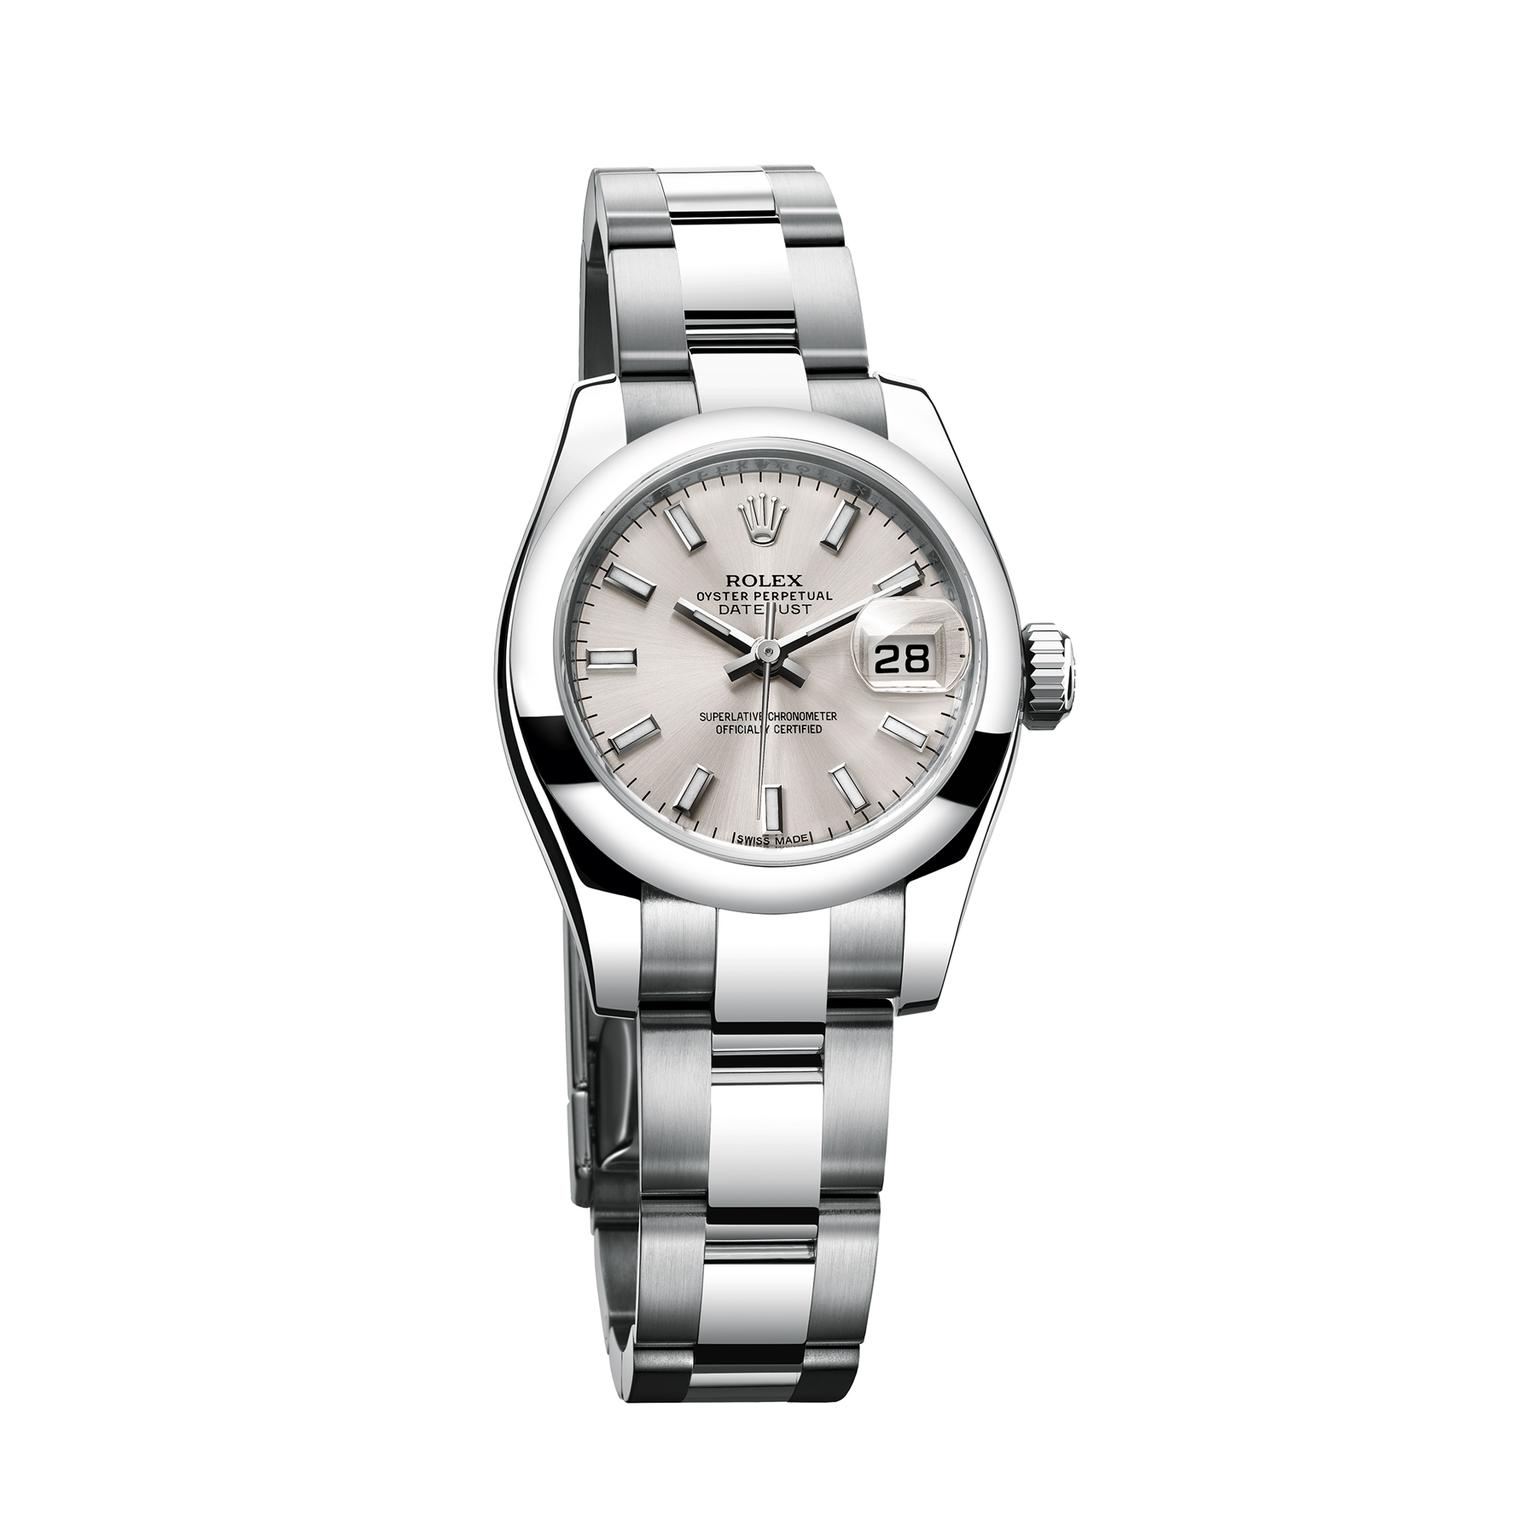 rolex oyster perpetual women's watch price